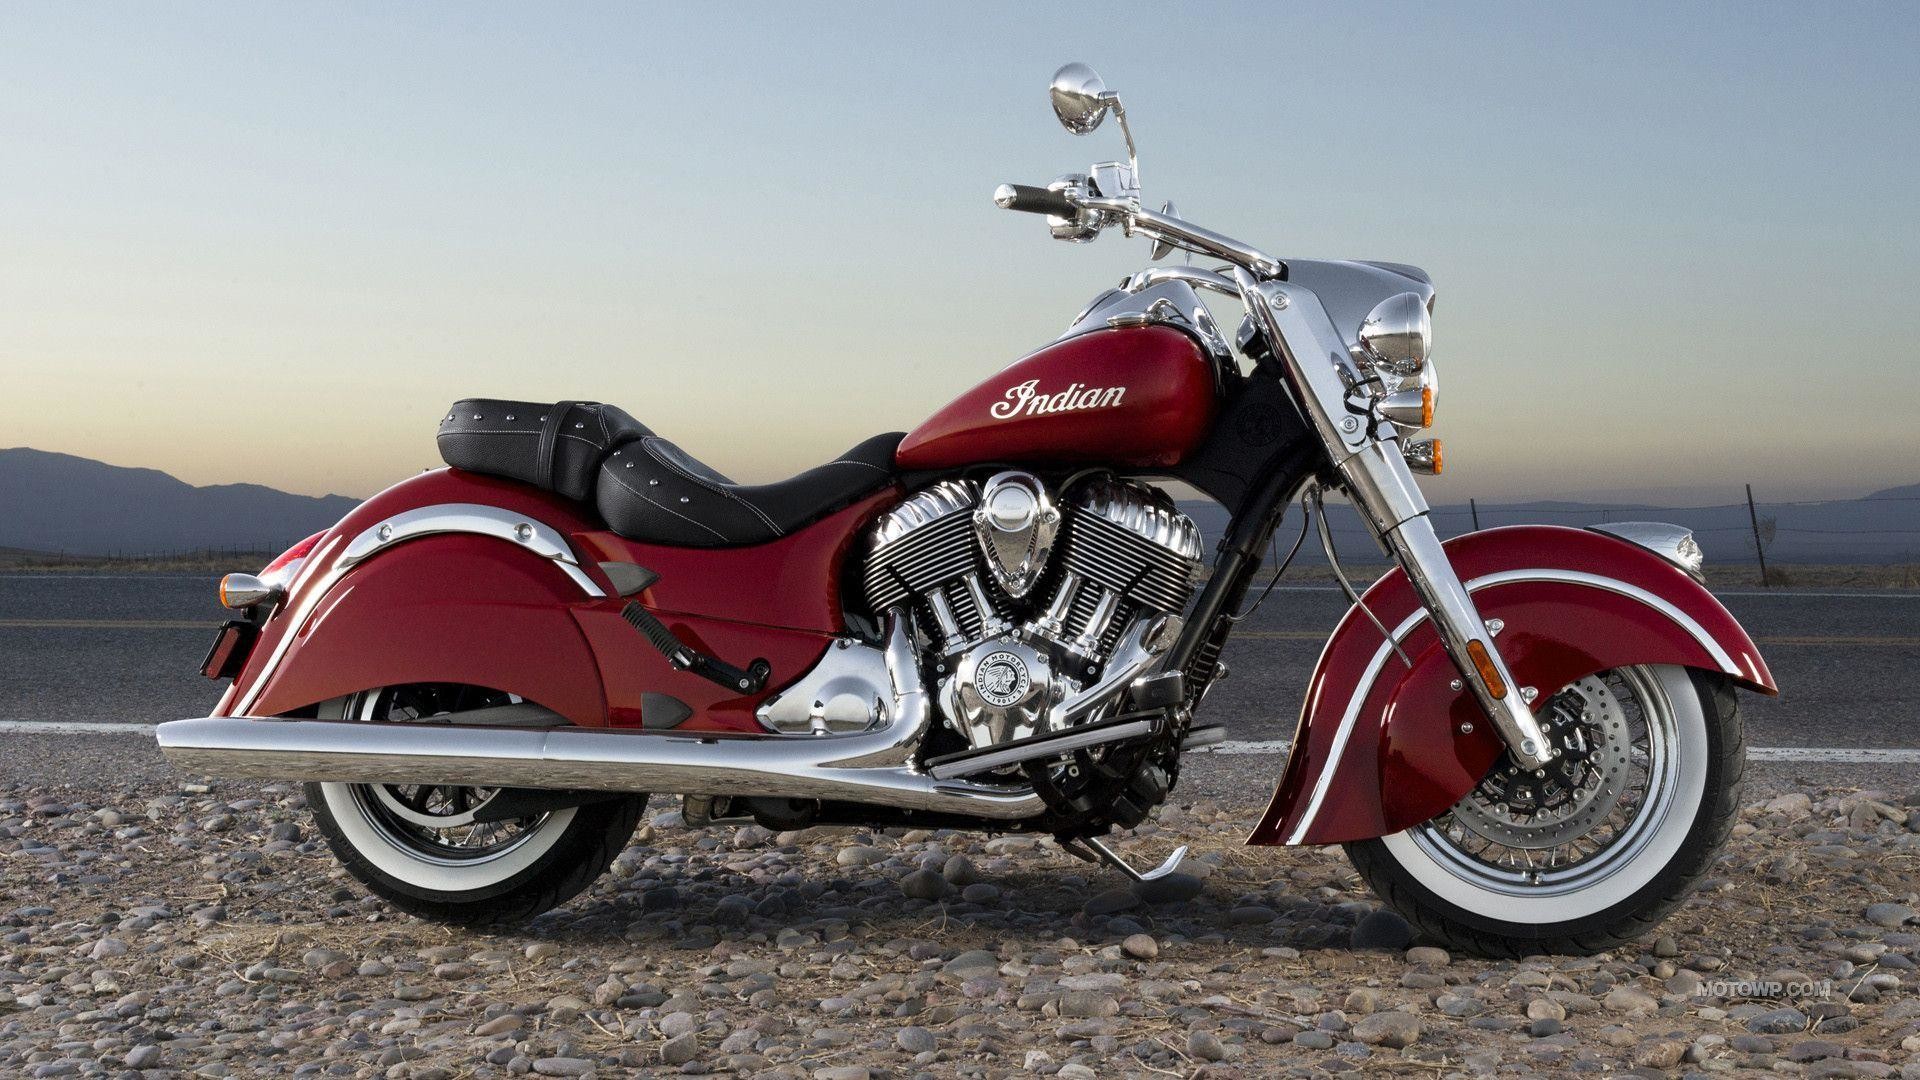 1920x1080 Indian Motorcycle Wallpapers 